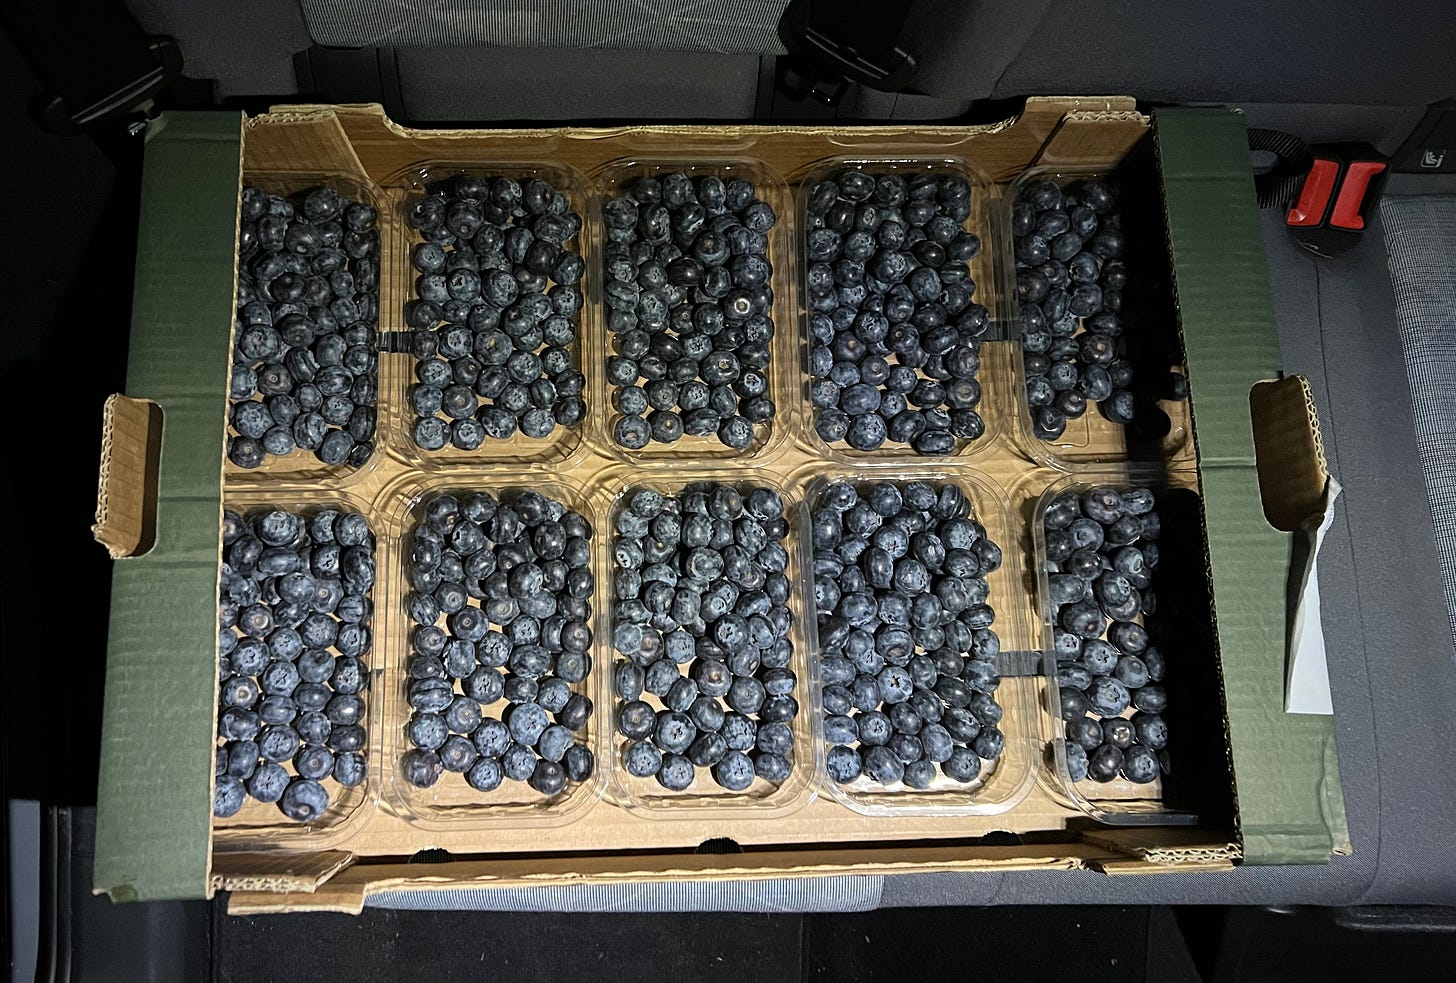 A cardboard tray sits on the back seat of a car. Ten punnets of blueberries are visible but there are another ten hiding underneath.  They look big plump and delicious.